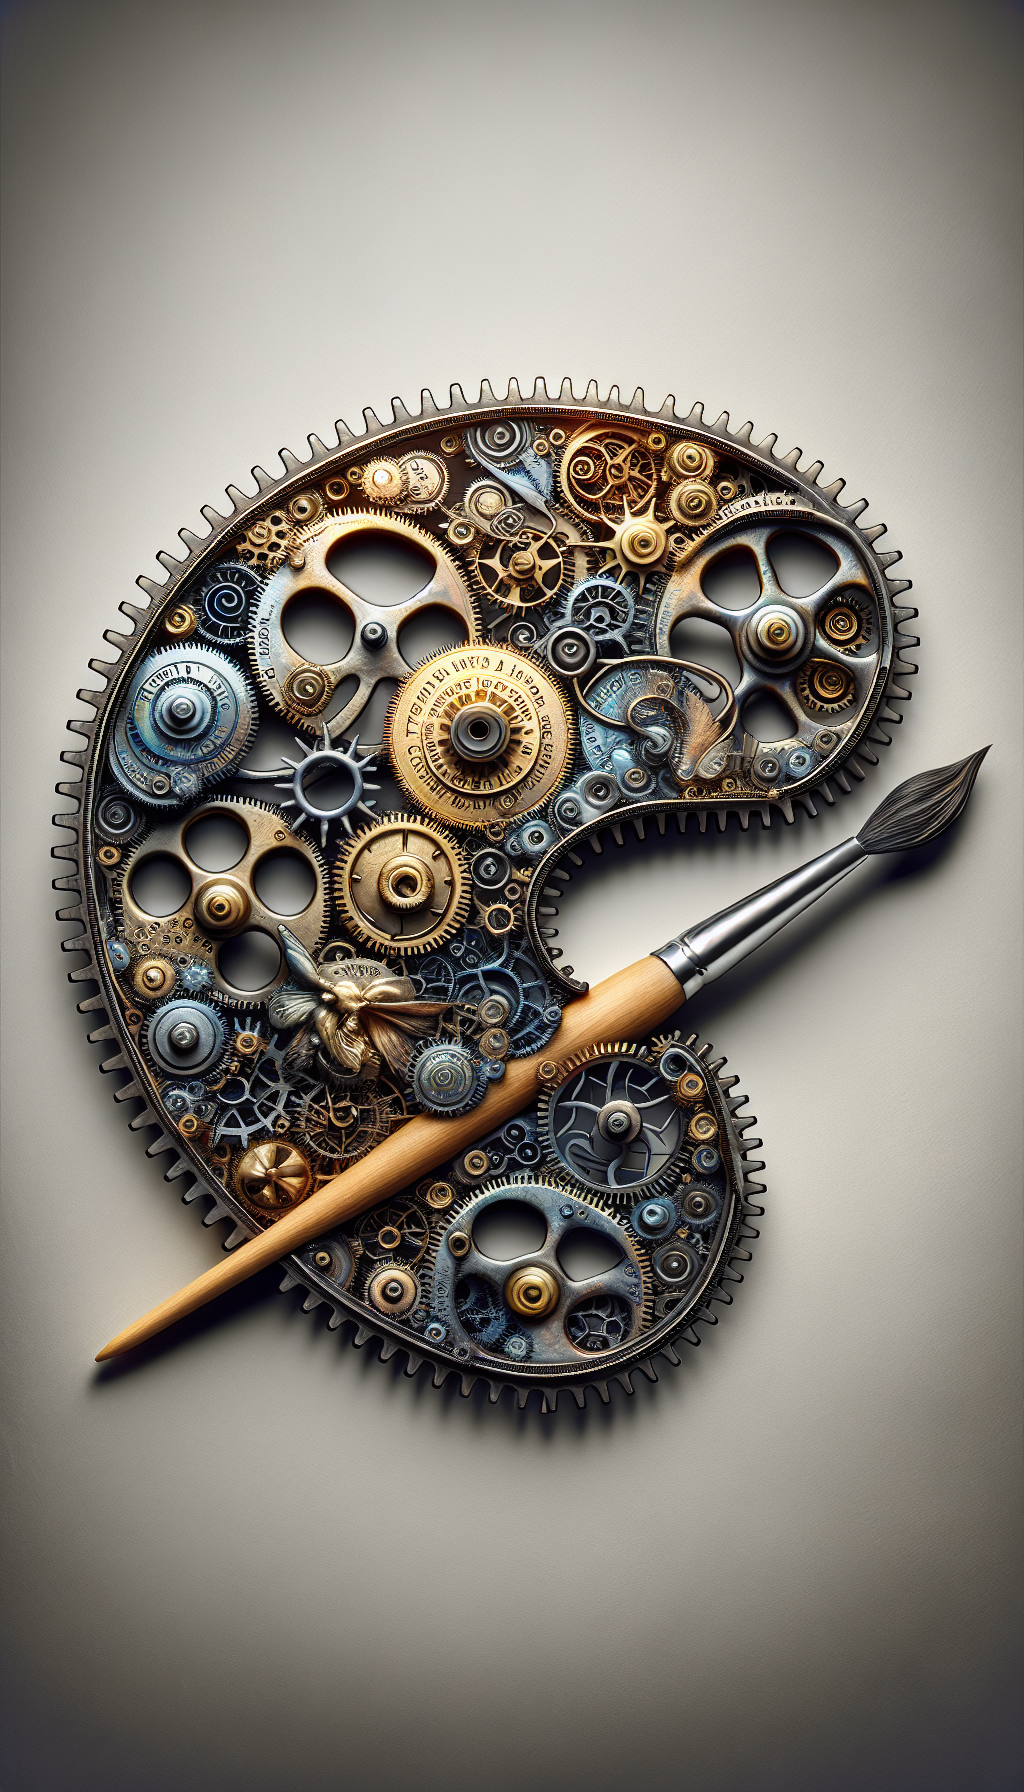 An intricate gear mechanism shaped like an artist's palette propels a brush on which various famous art pieces morph, symbolizing innovation's cycle. Each gear is finely inscribed with words like "creativity," "inspiration," and "progress," merging steampunk with modernism. An ethereal, shimmering coin depicting Muses entwines with the gears, embodying the intrinsic value of arts in the engine of advancement.